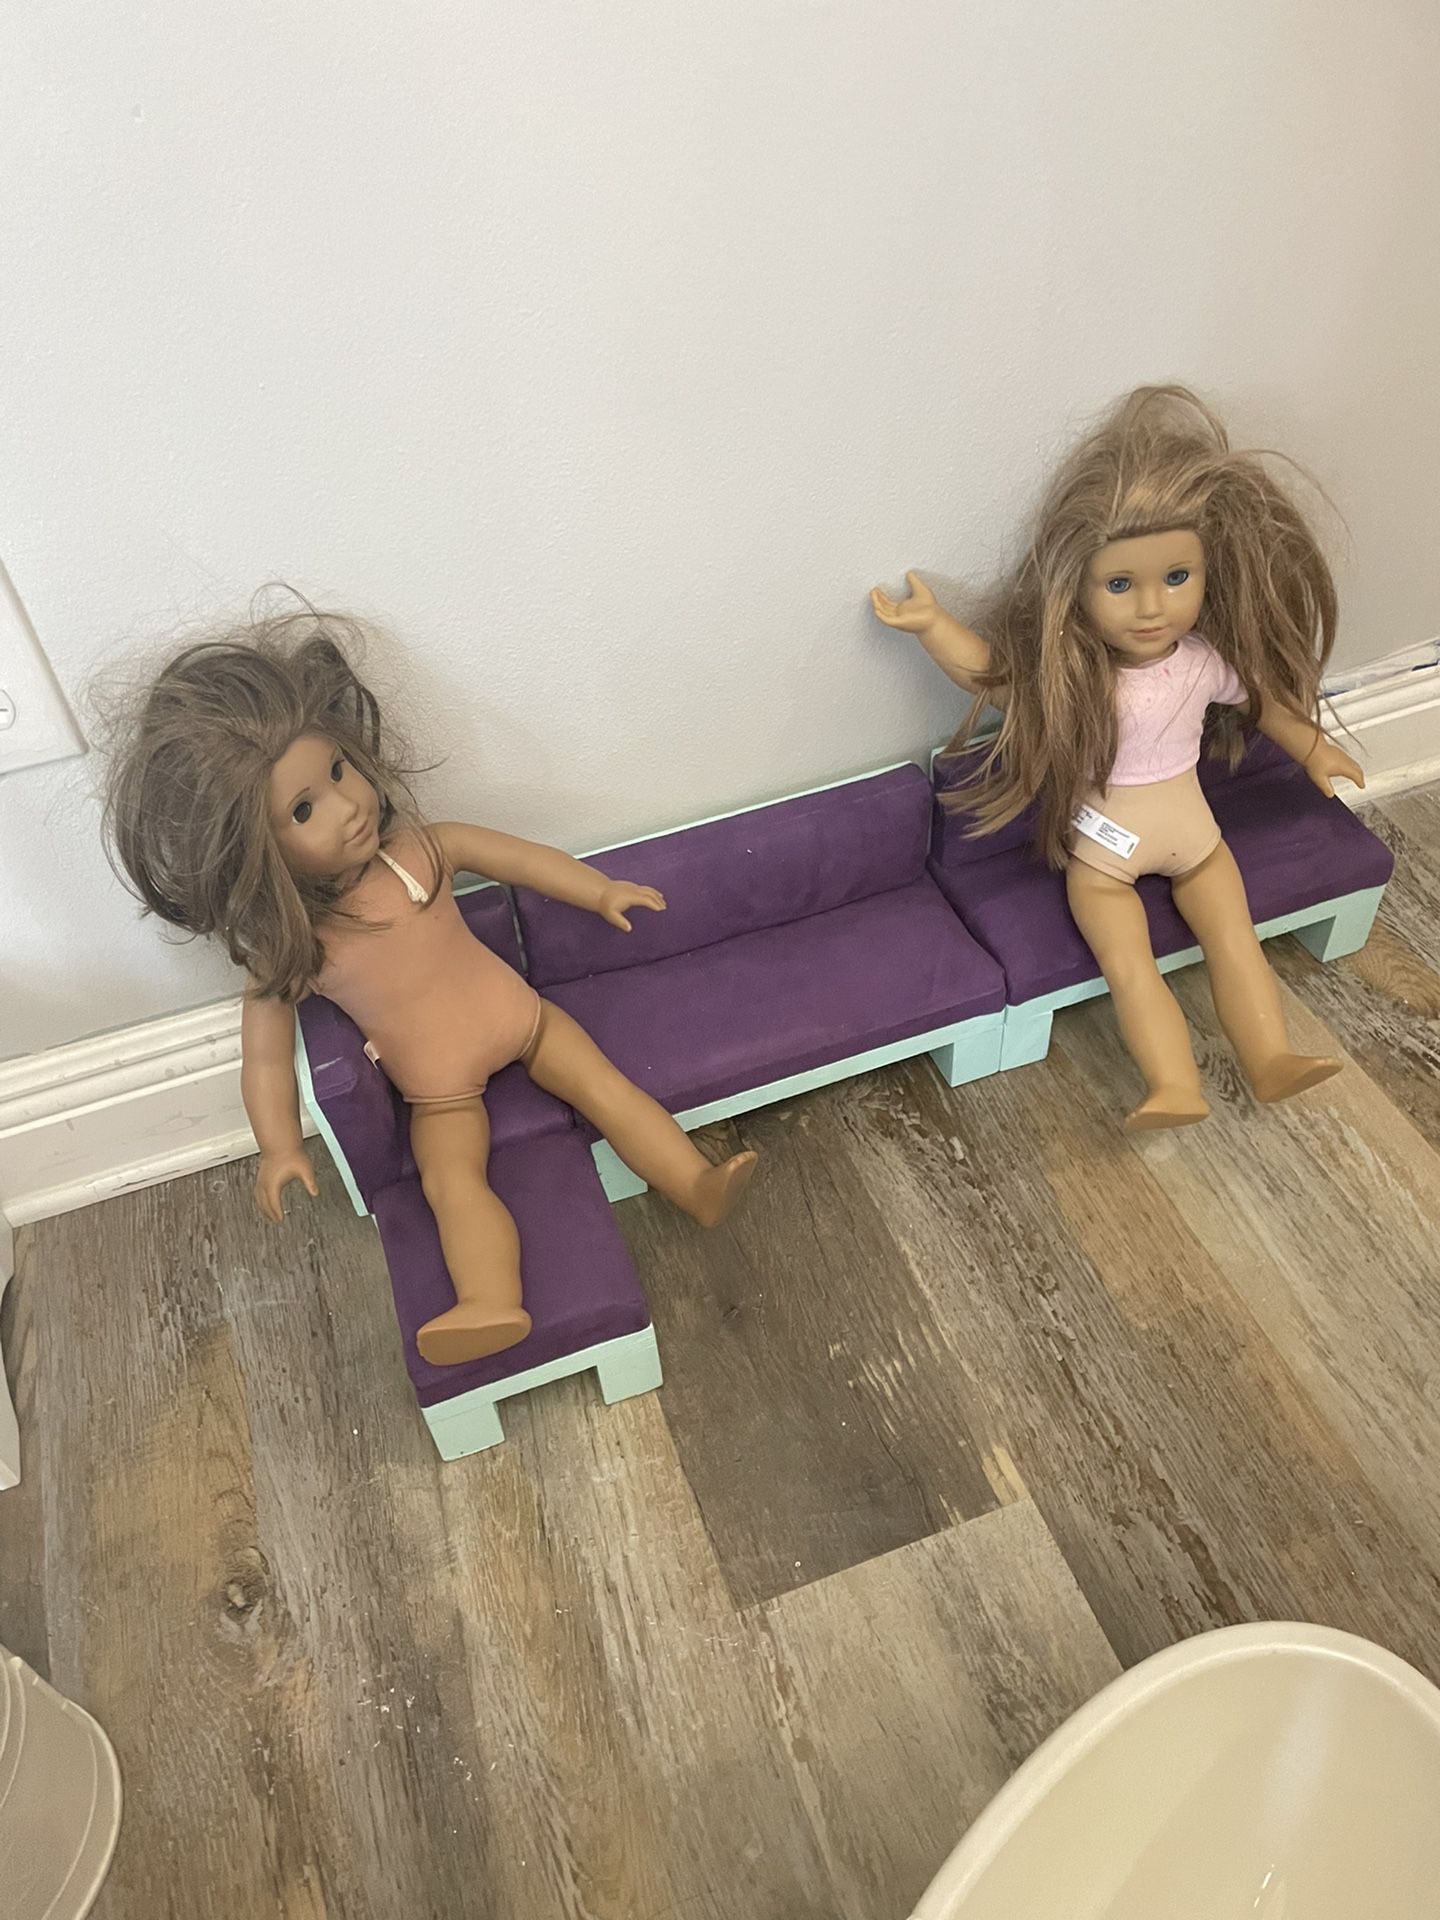 Living room furniture for an 18 inch doll or an American girl doll our journey girl doll